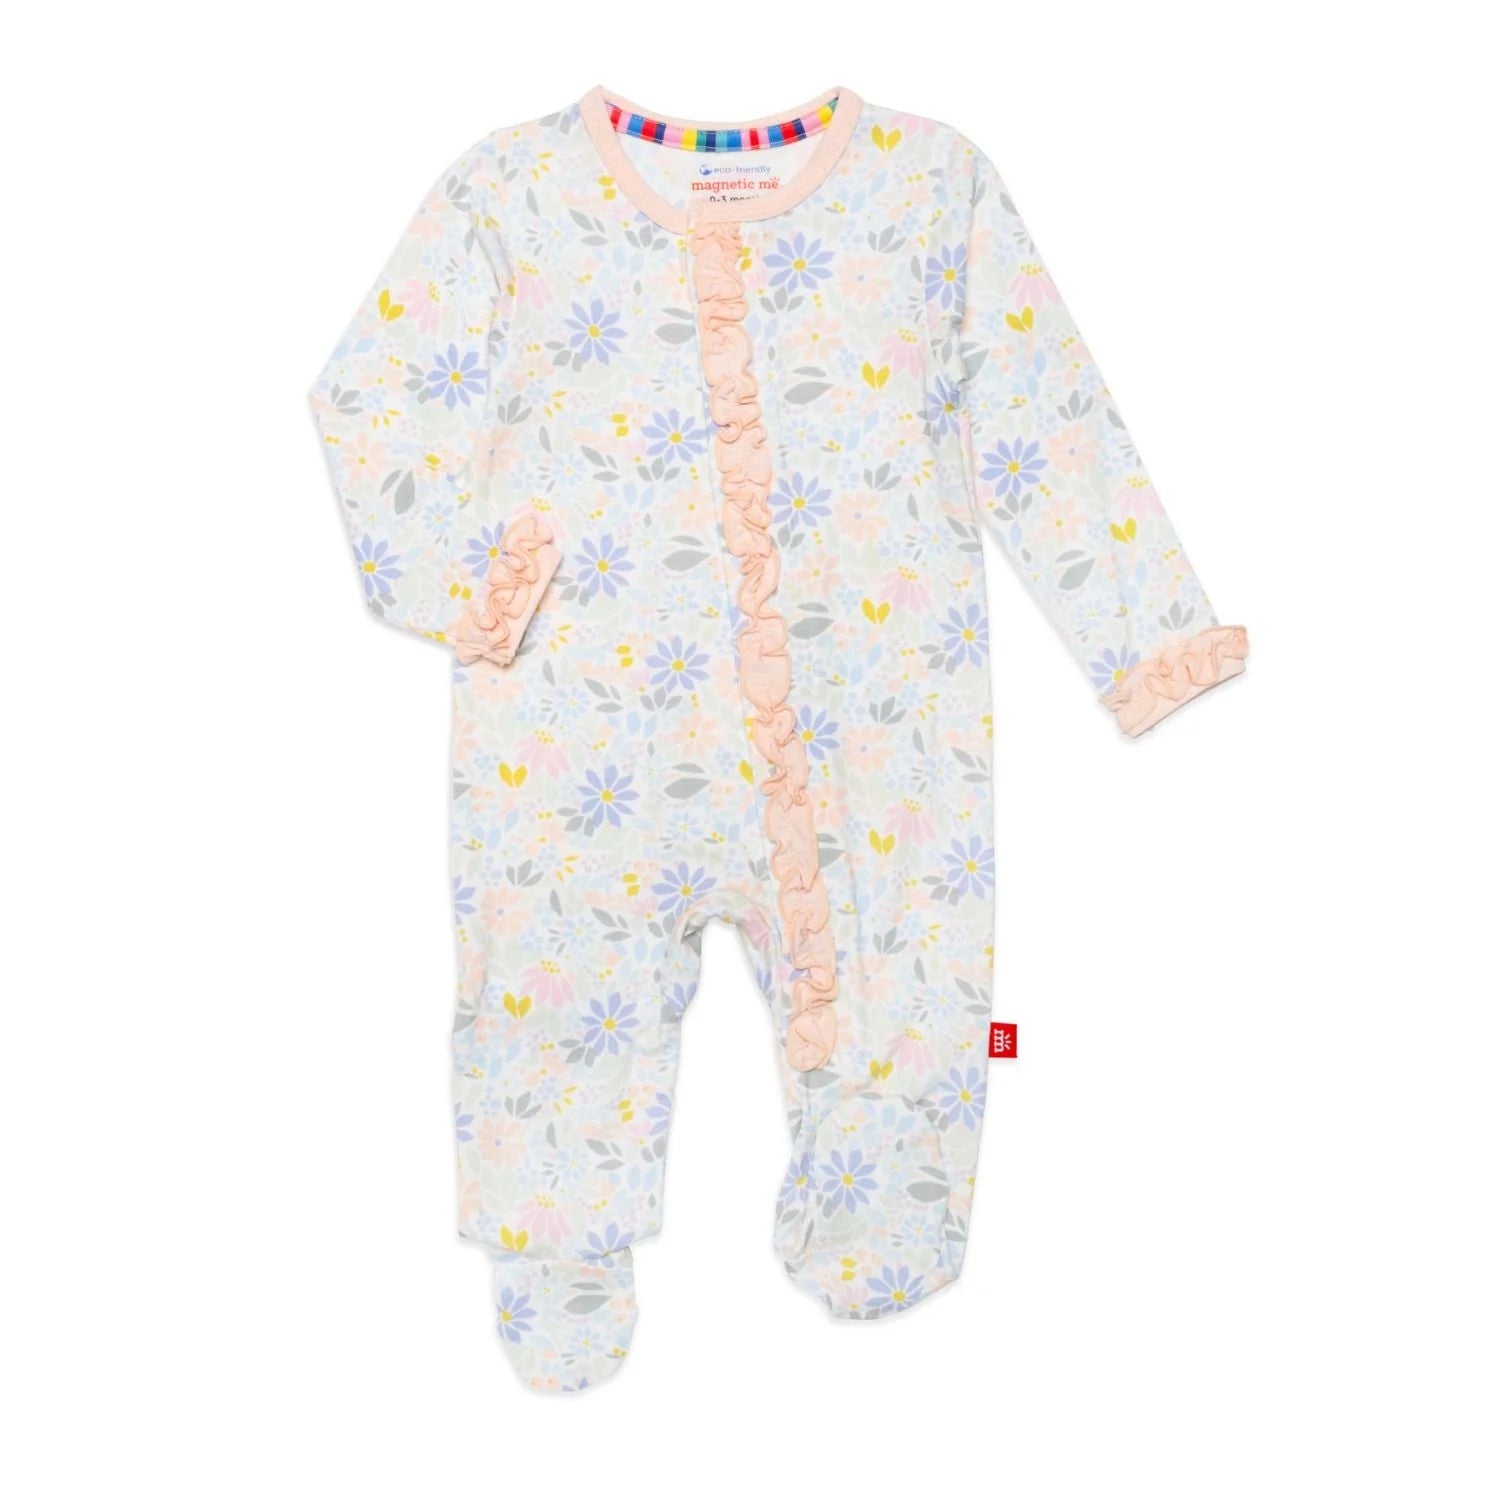 Magnetic Me Baby Footie  MS44MF01DY  Darby